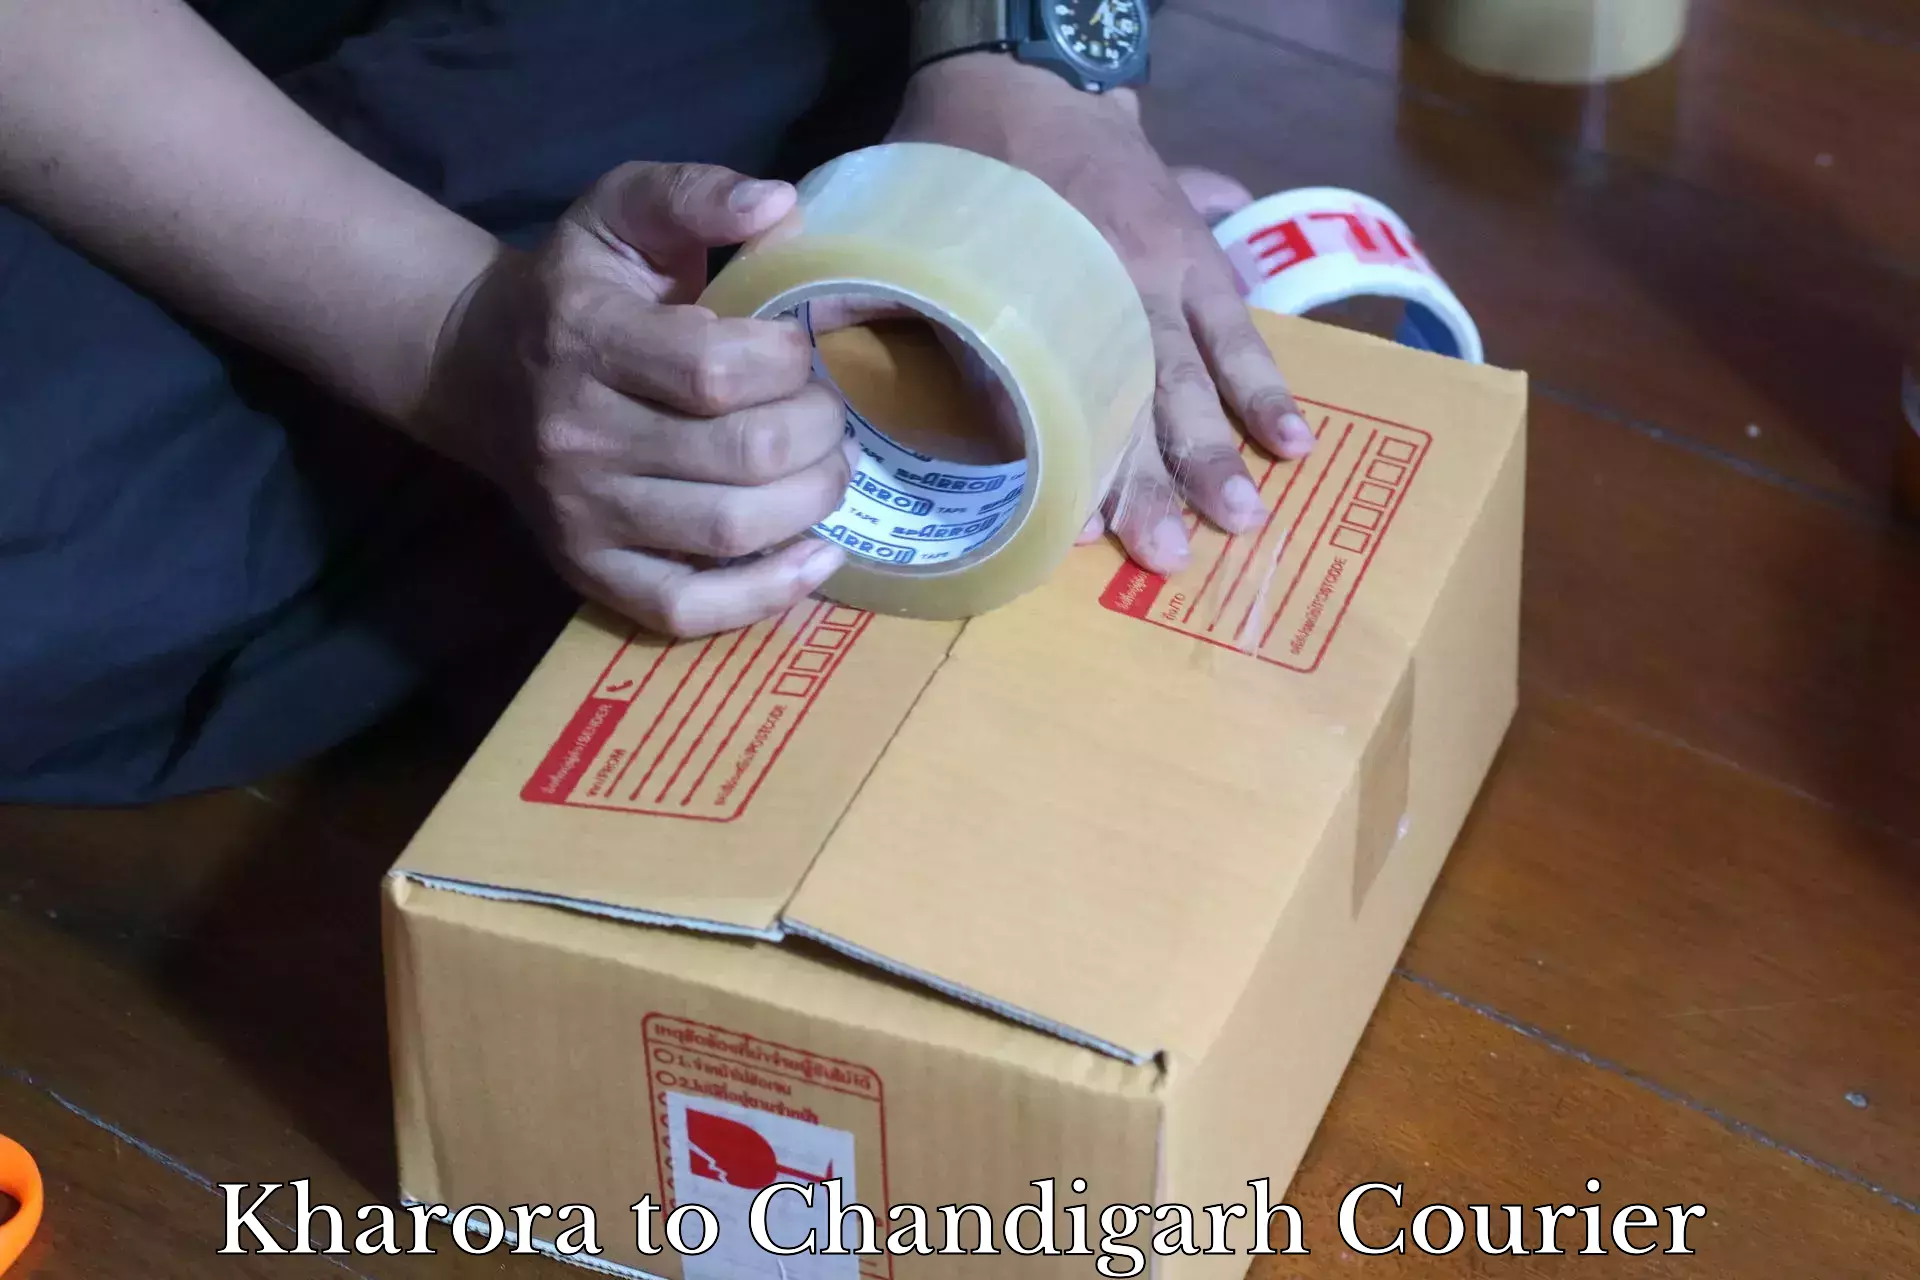 Easy access courier services Kharora to Chandigarh